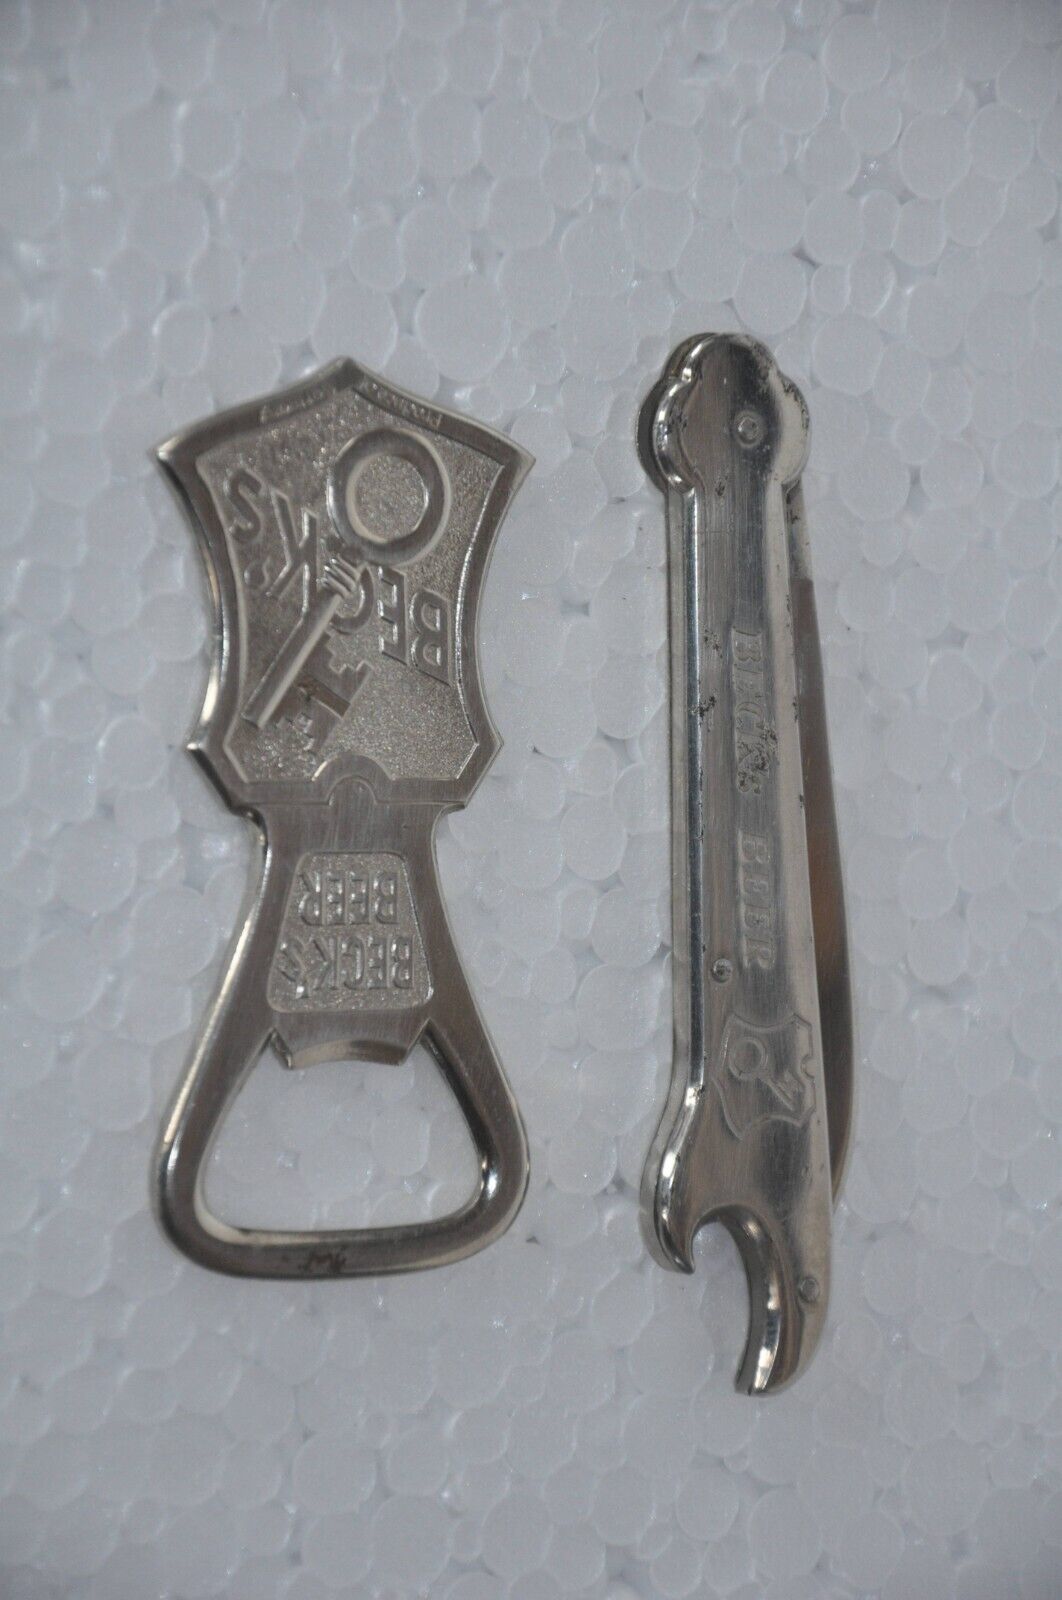 2 Pc Vintage Iron Beck's Beer Ad Nickel Plated Opener With Knife , Germany